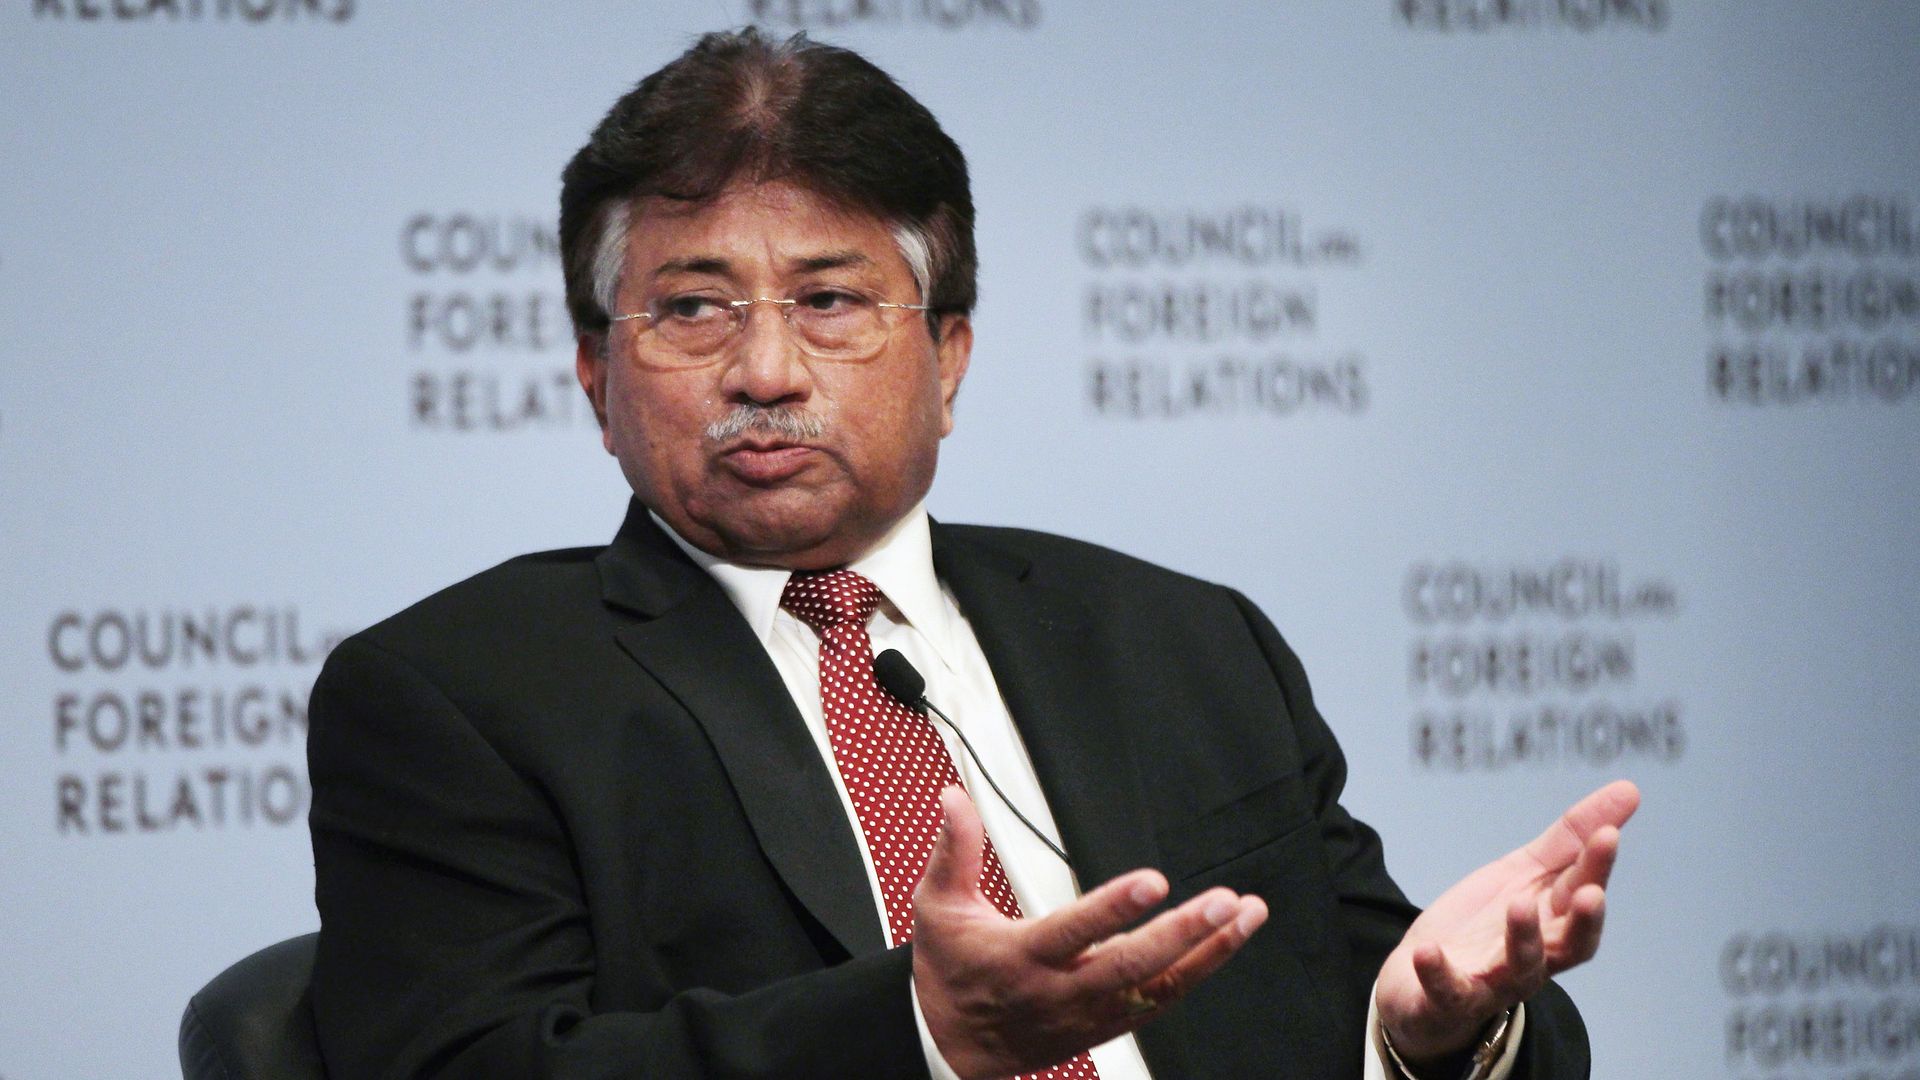  Former Pakistani president General Pervez Musharraf speaks at the Council on Foreign Relations on November 2, 2011 in New York City.